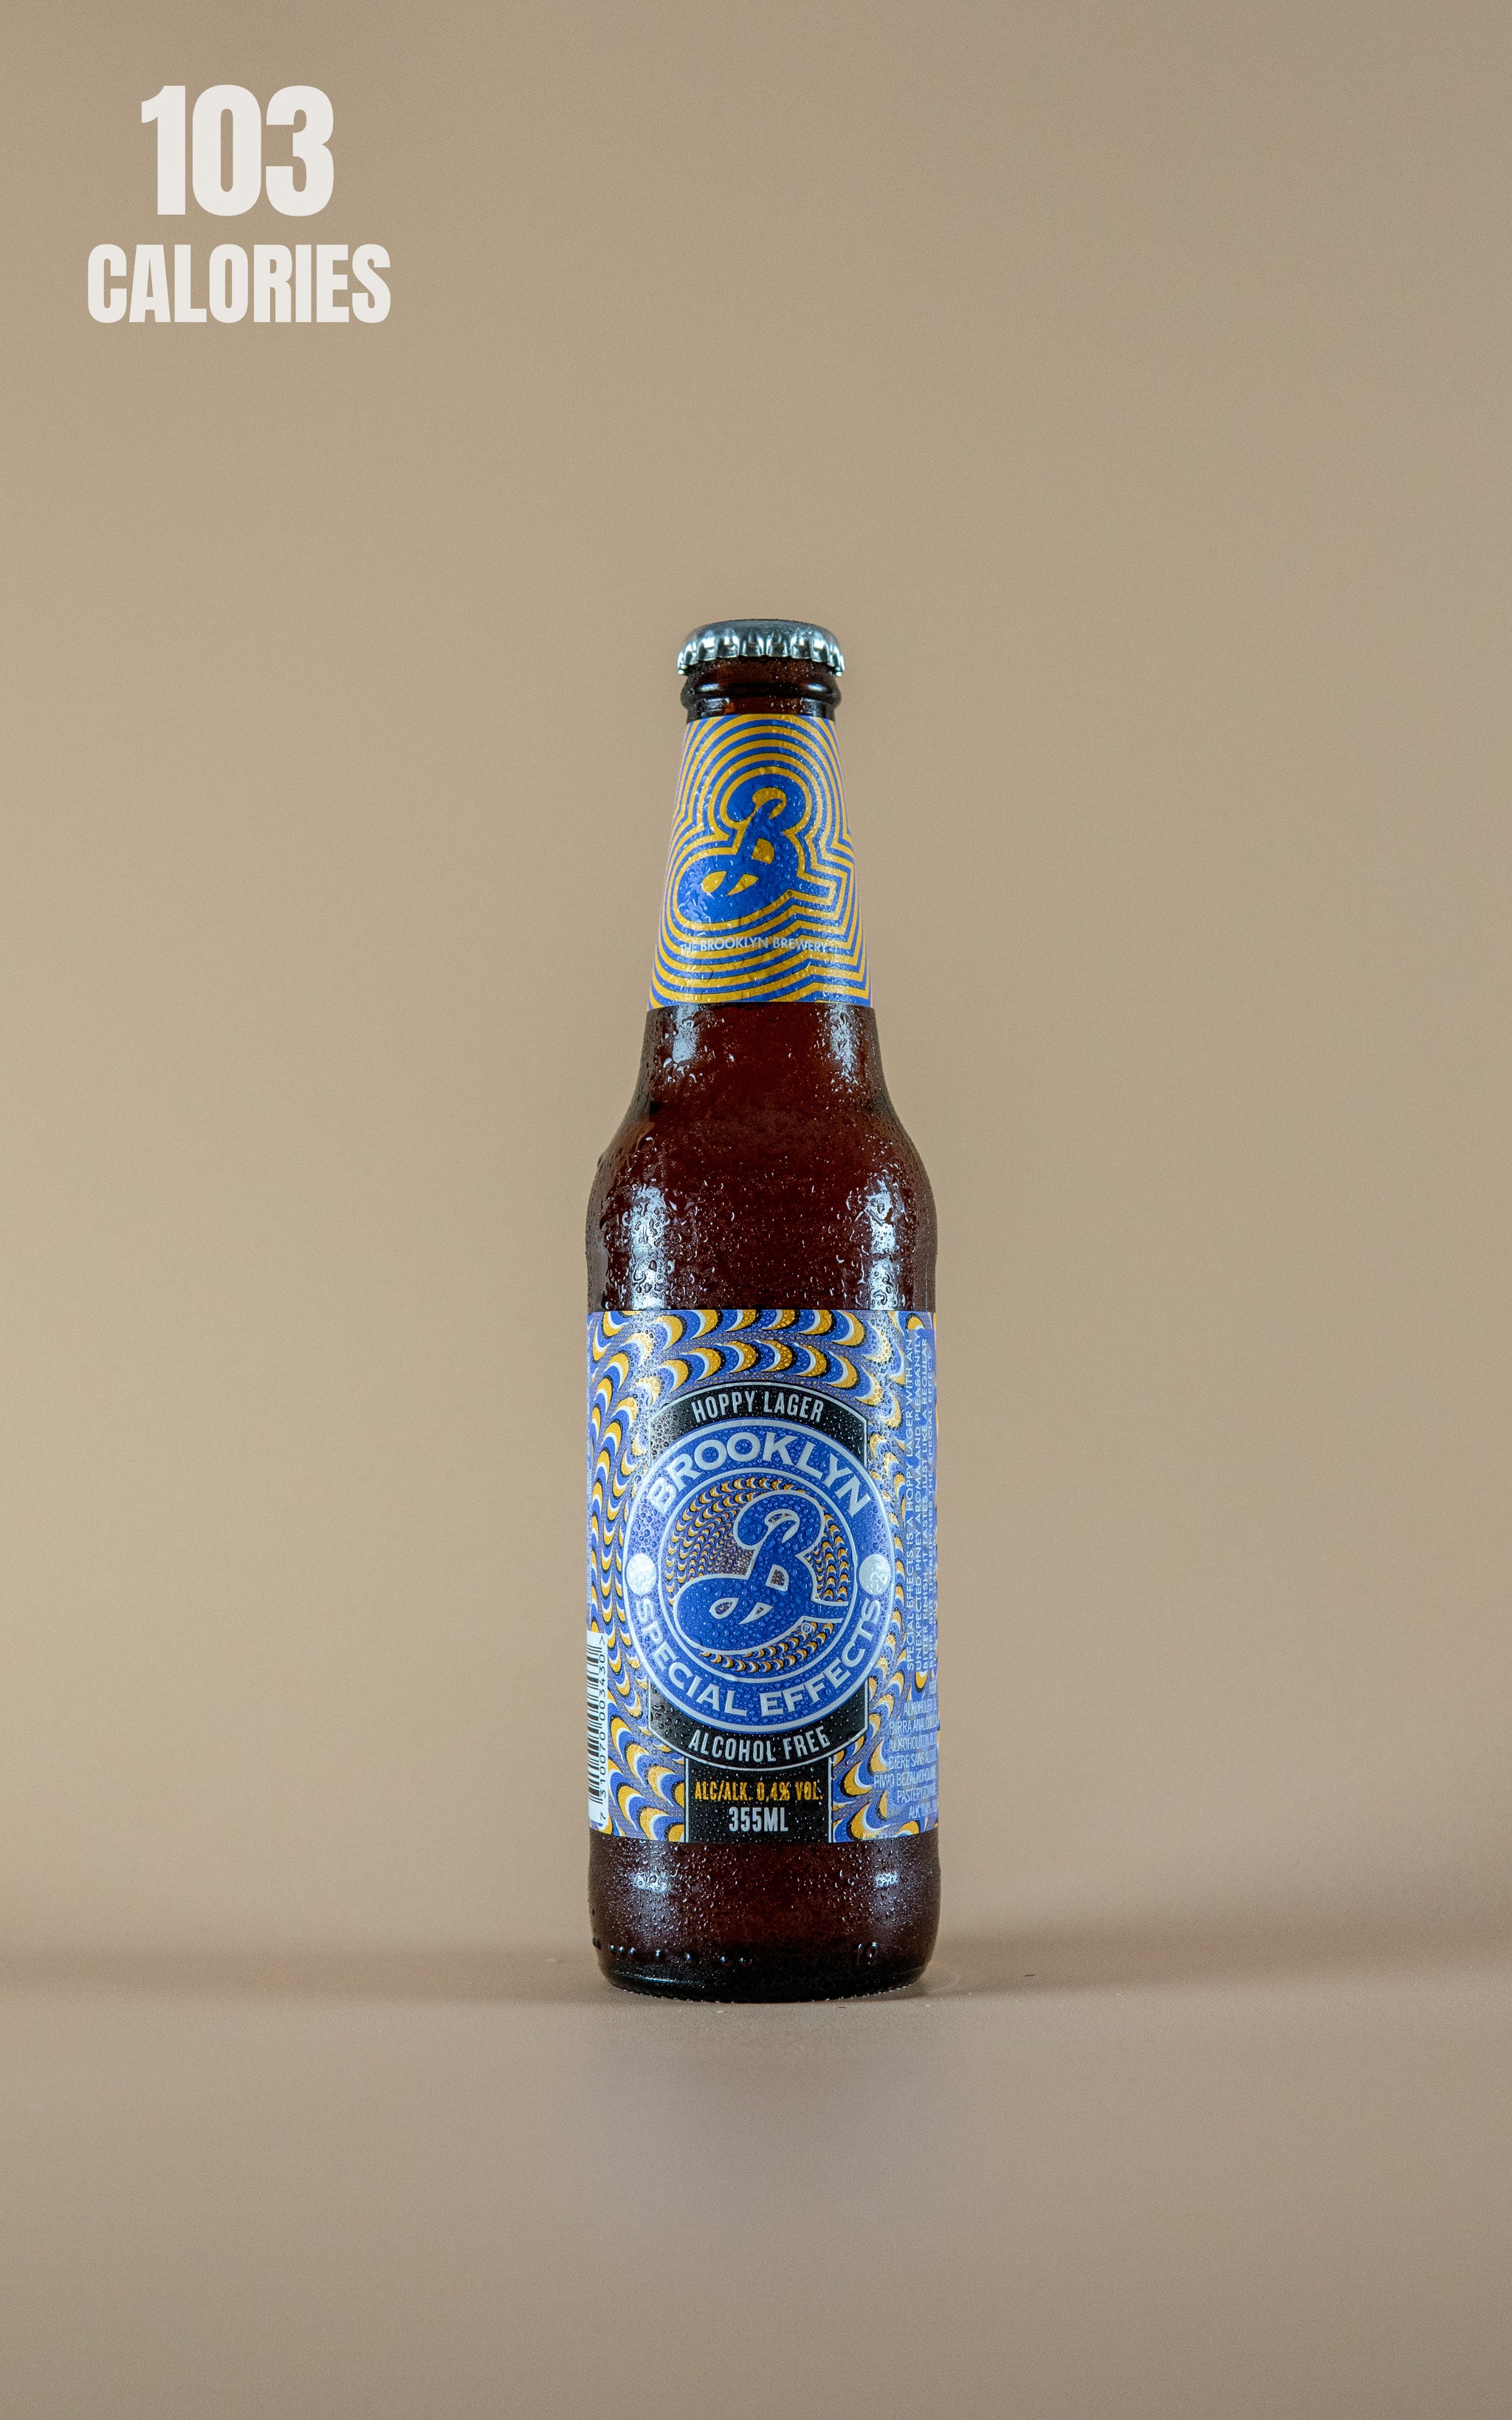 Brooklyn Brewery Special Effects 0.4% - 355ml | LightDrinks | Alcohol ...